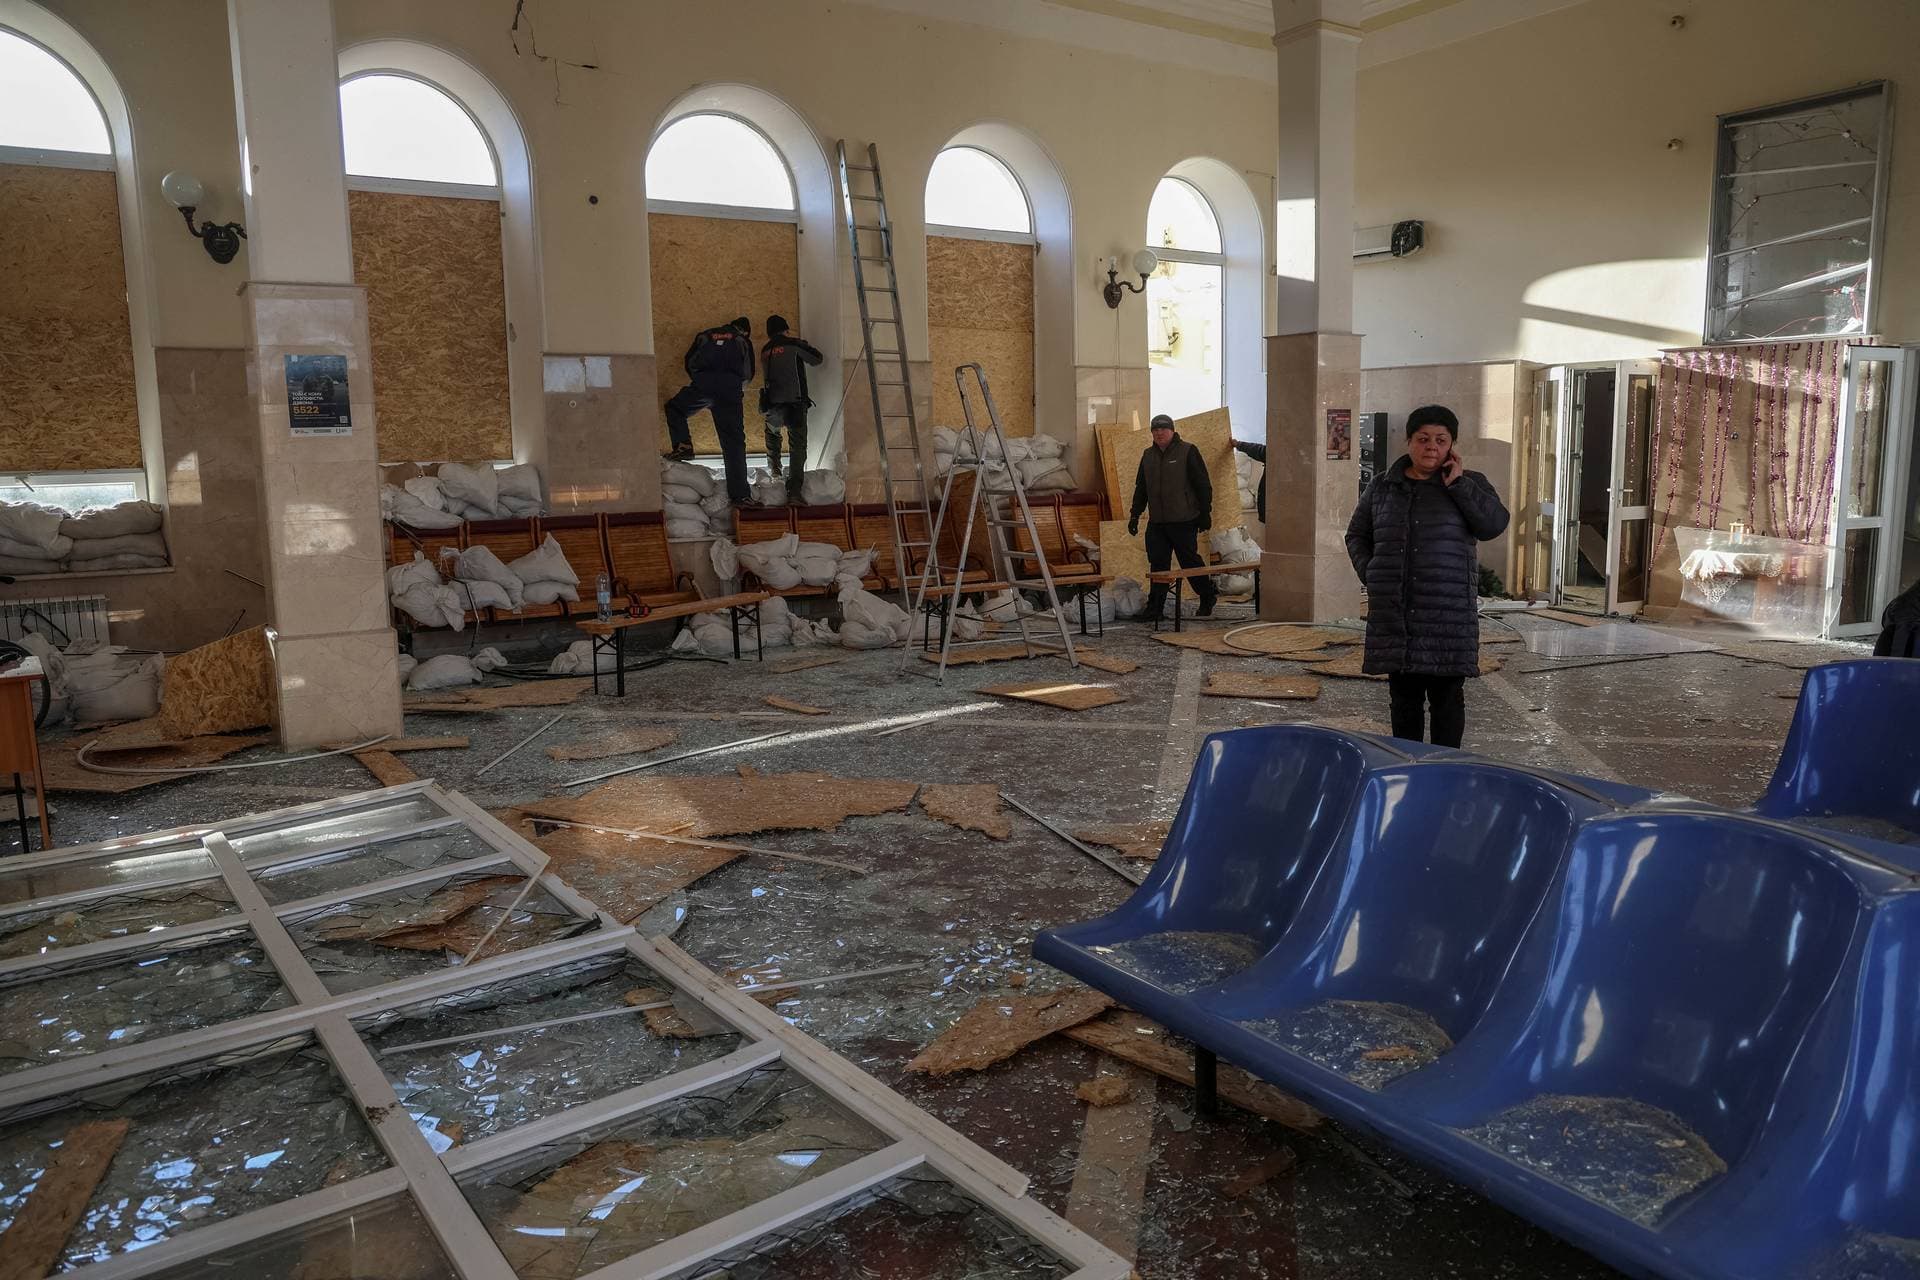 Workers clean up an area of the train station following the attack in Kherson